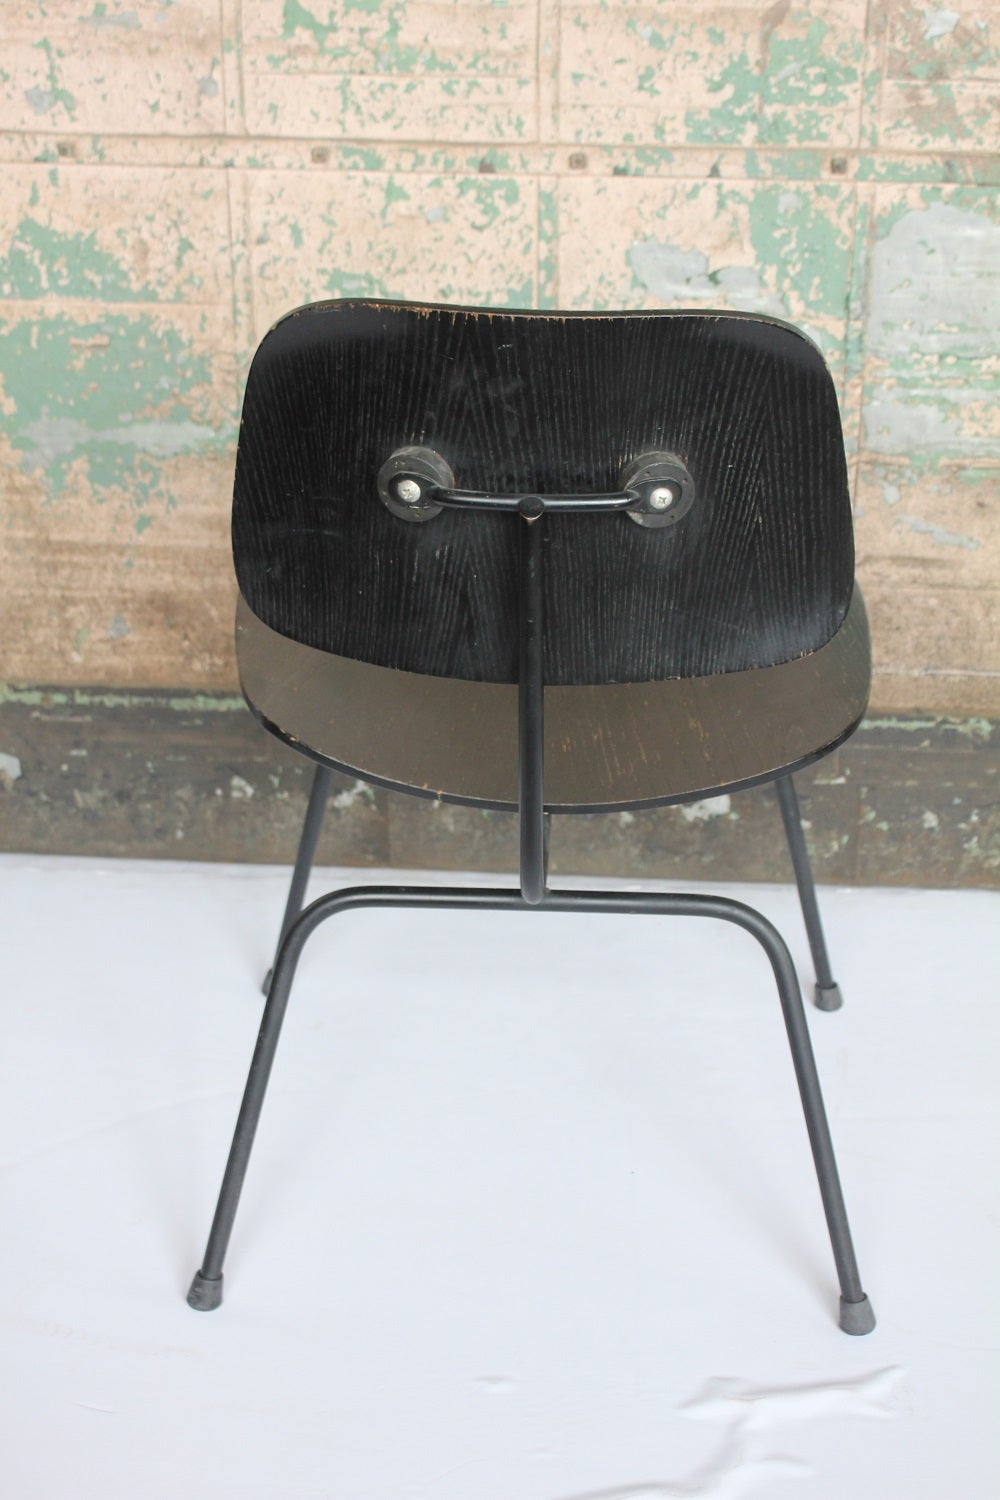 1950s all black DCM chair by Charles & Ray Eames for Herman Miller.